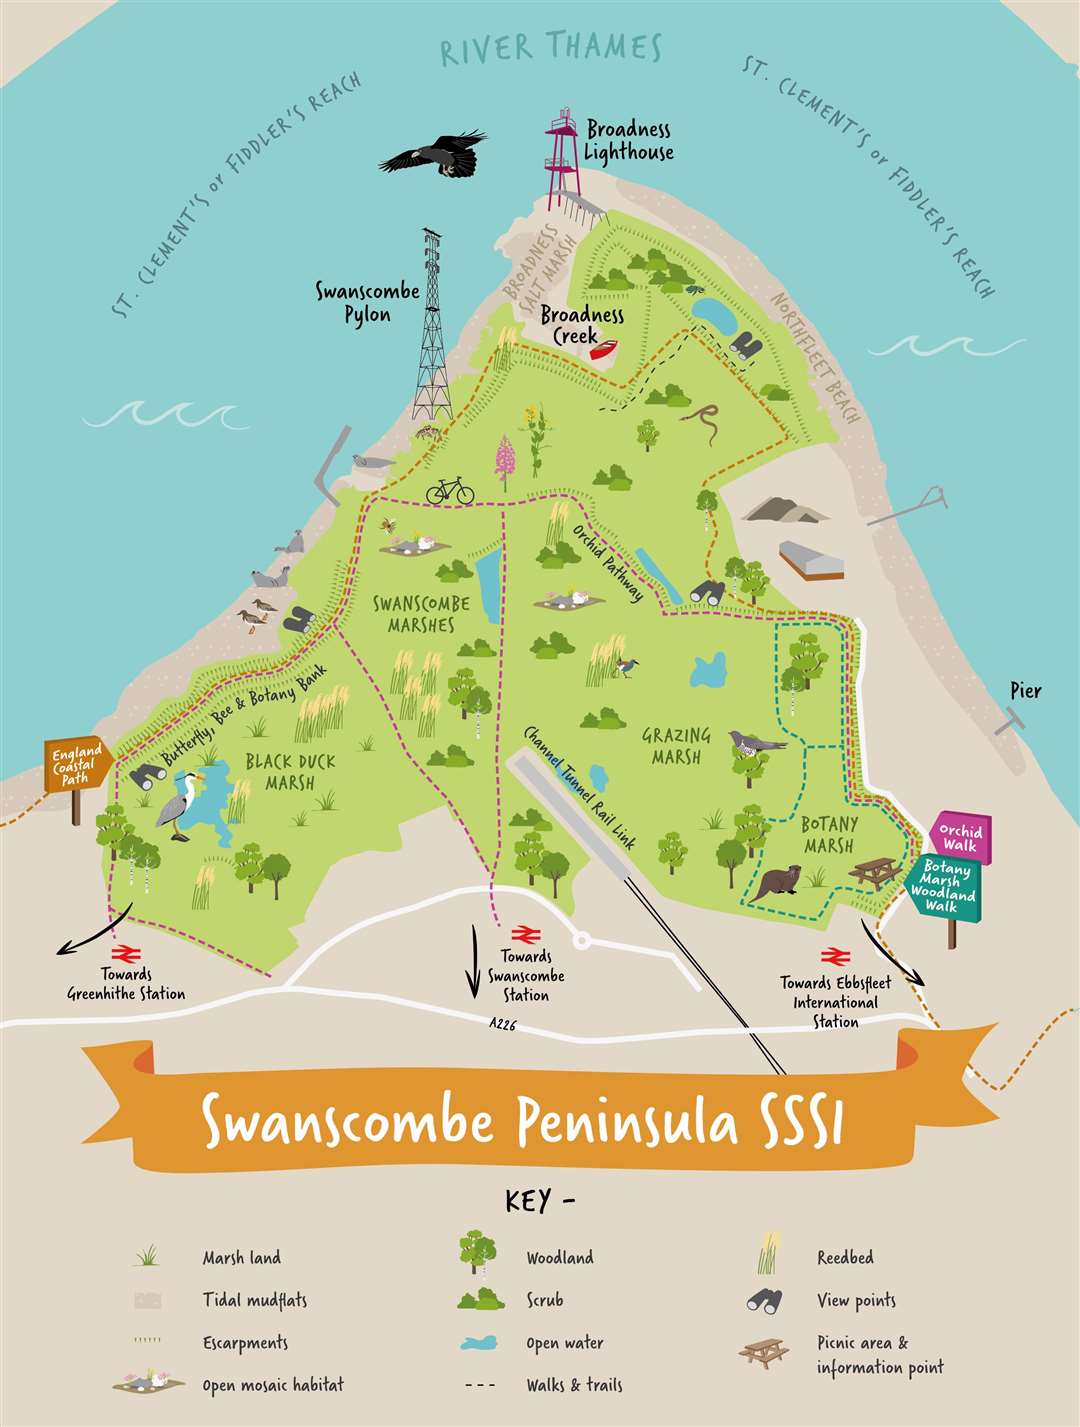 A map of the Swanscombe Peninsula site as envisioned under the new vision. Photo: Save Swanscombe Peninsula